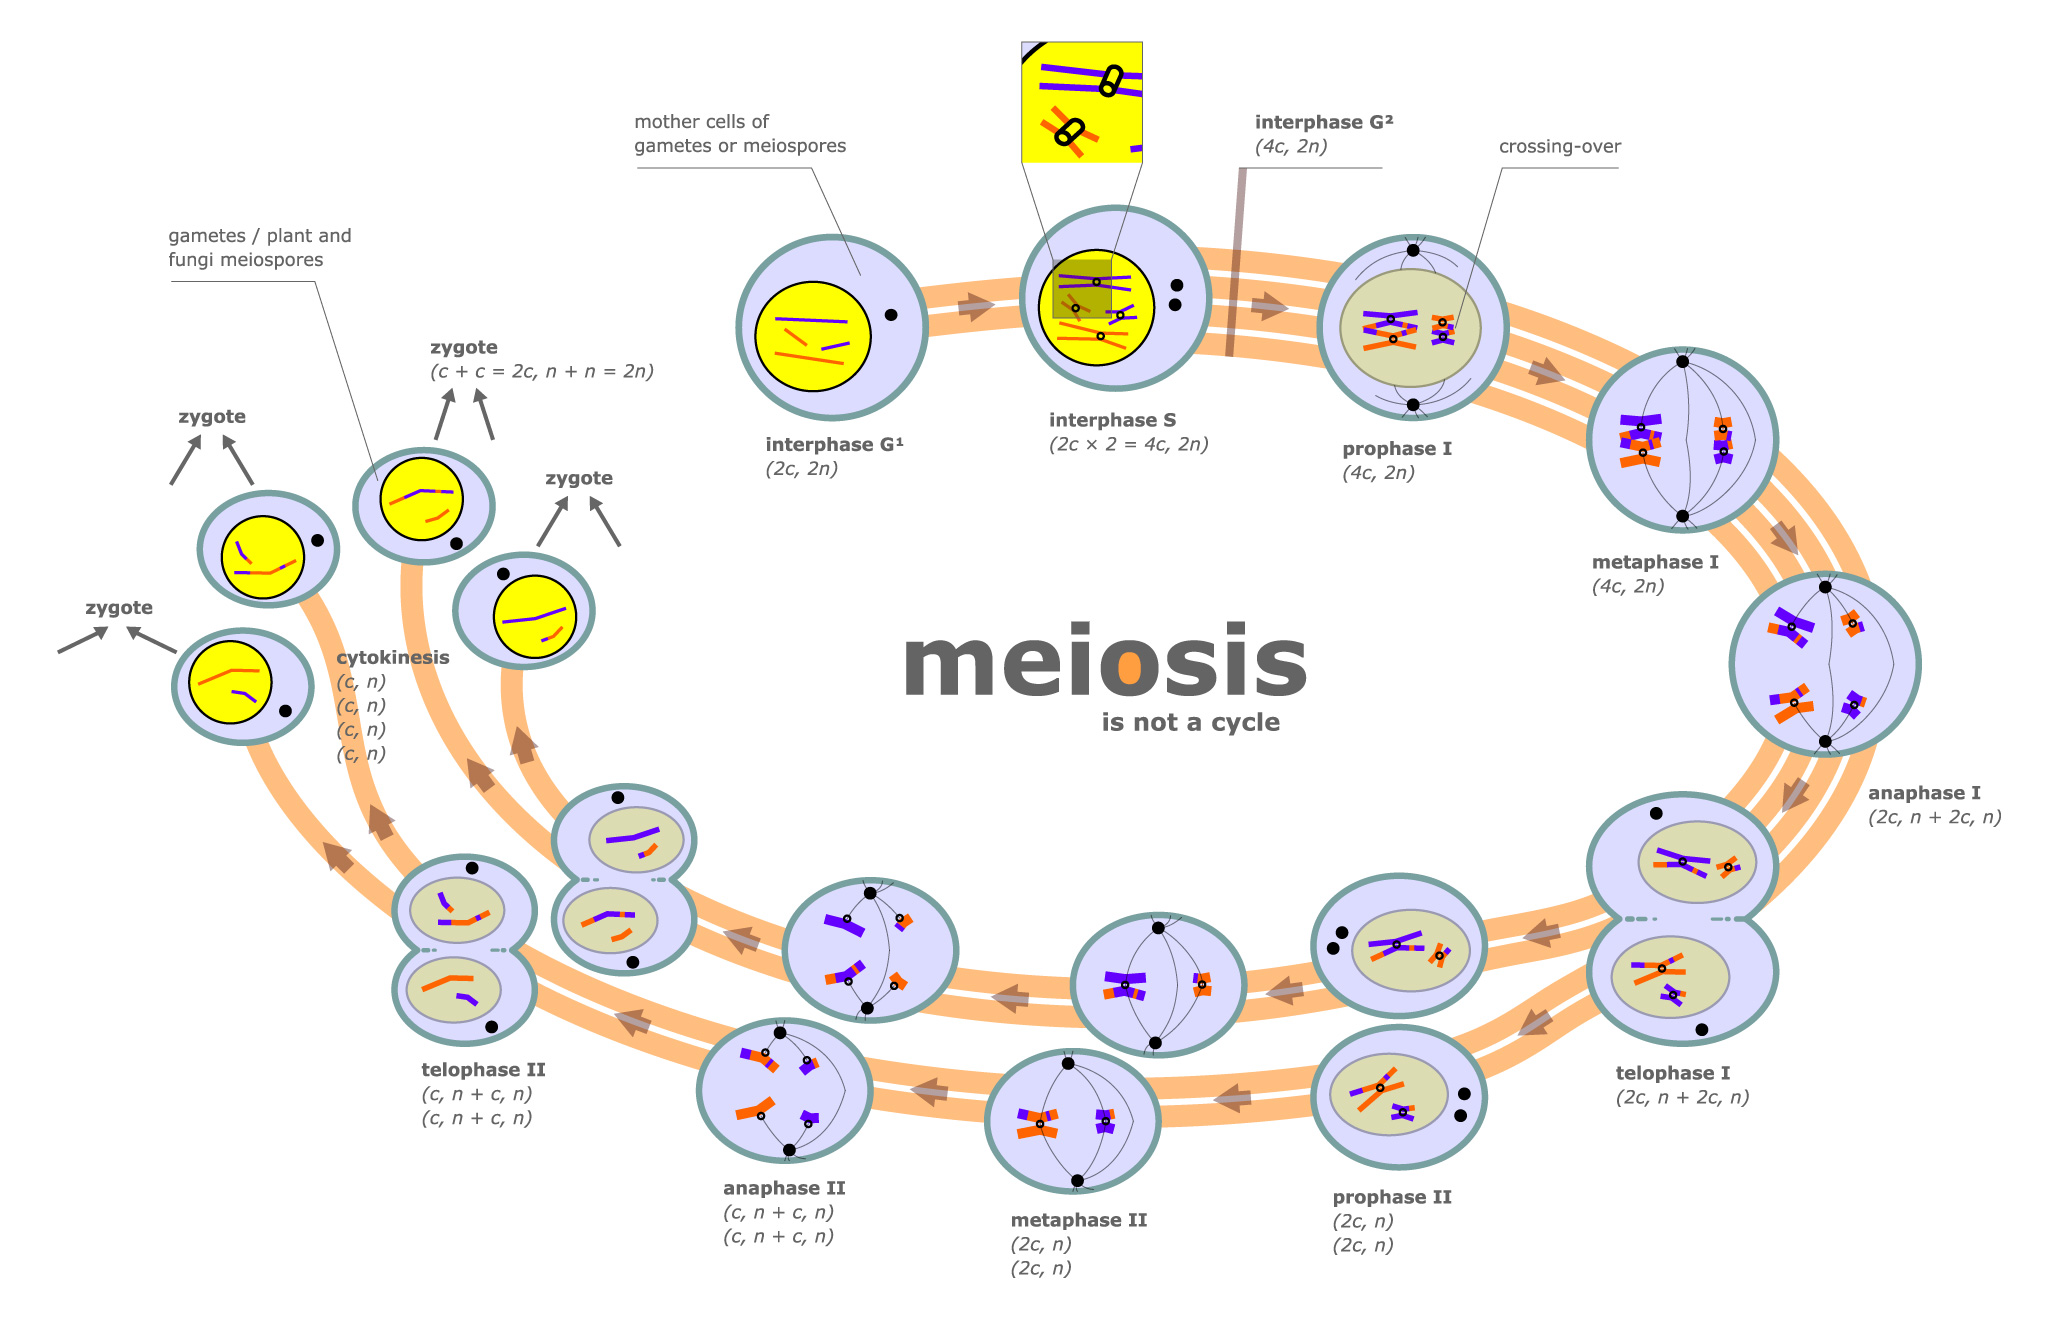 An educational diagram illustrating the complex stages of meiosis, emphasizing that it is not a cyclical process.